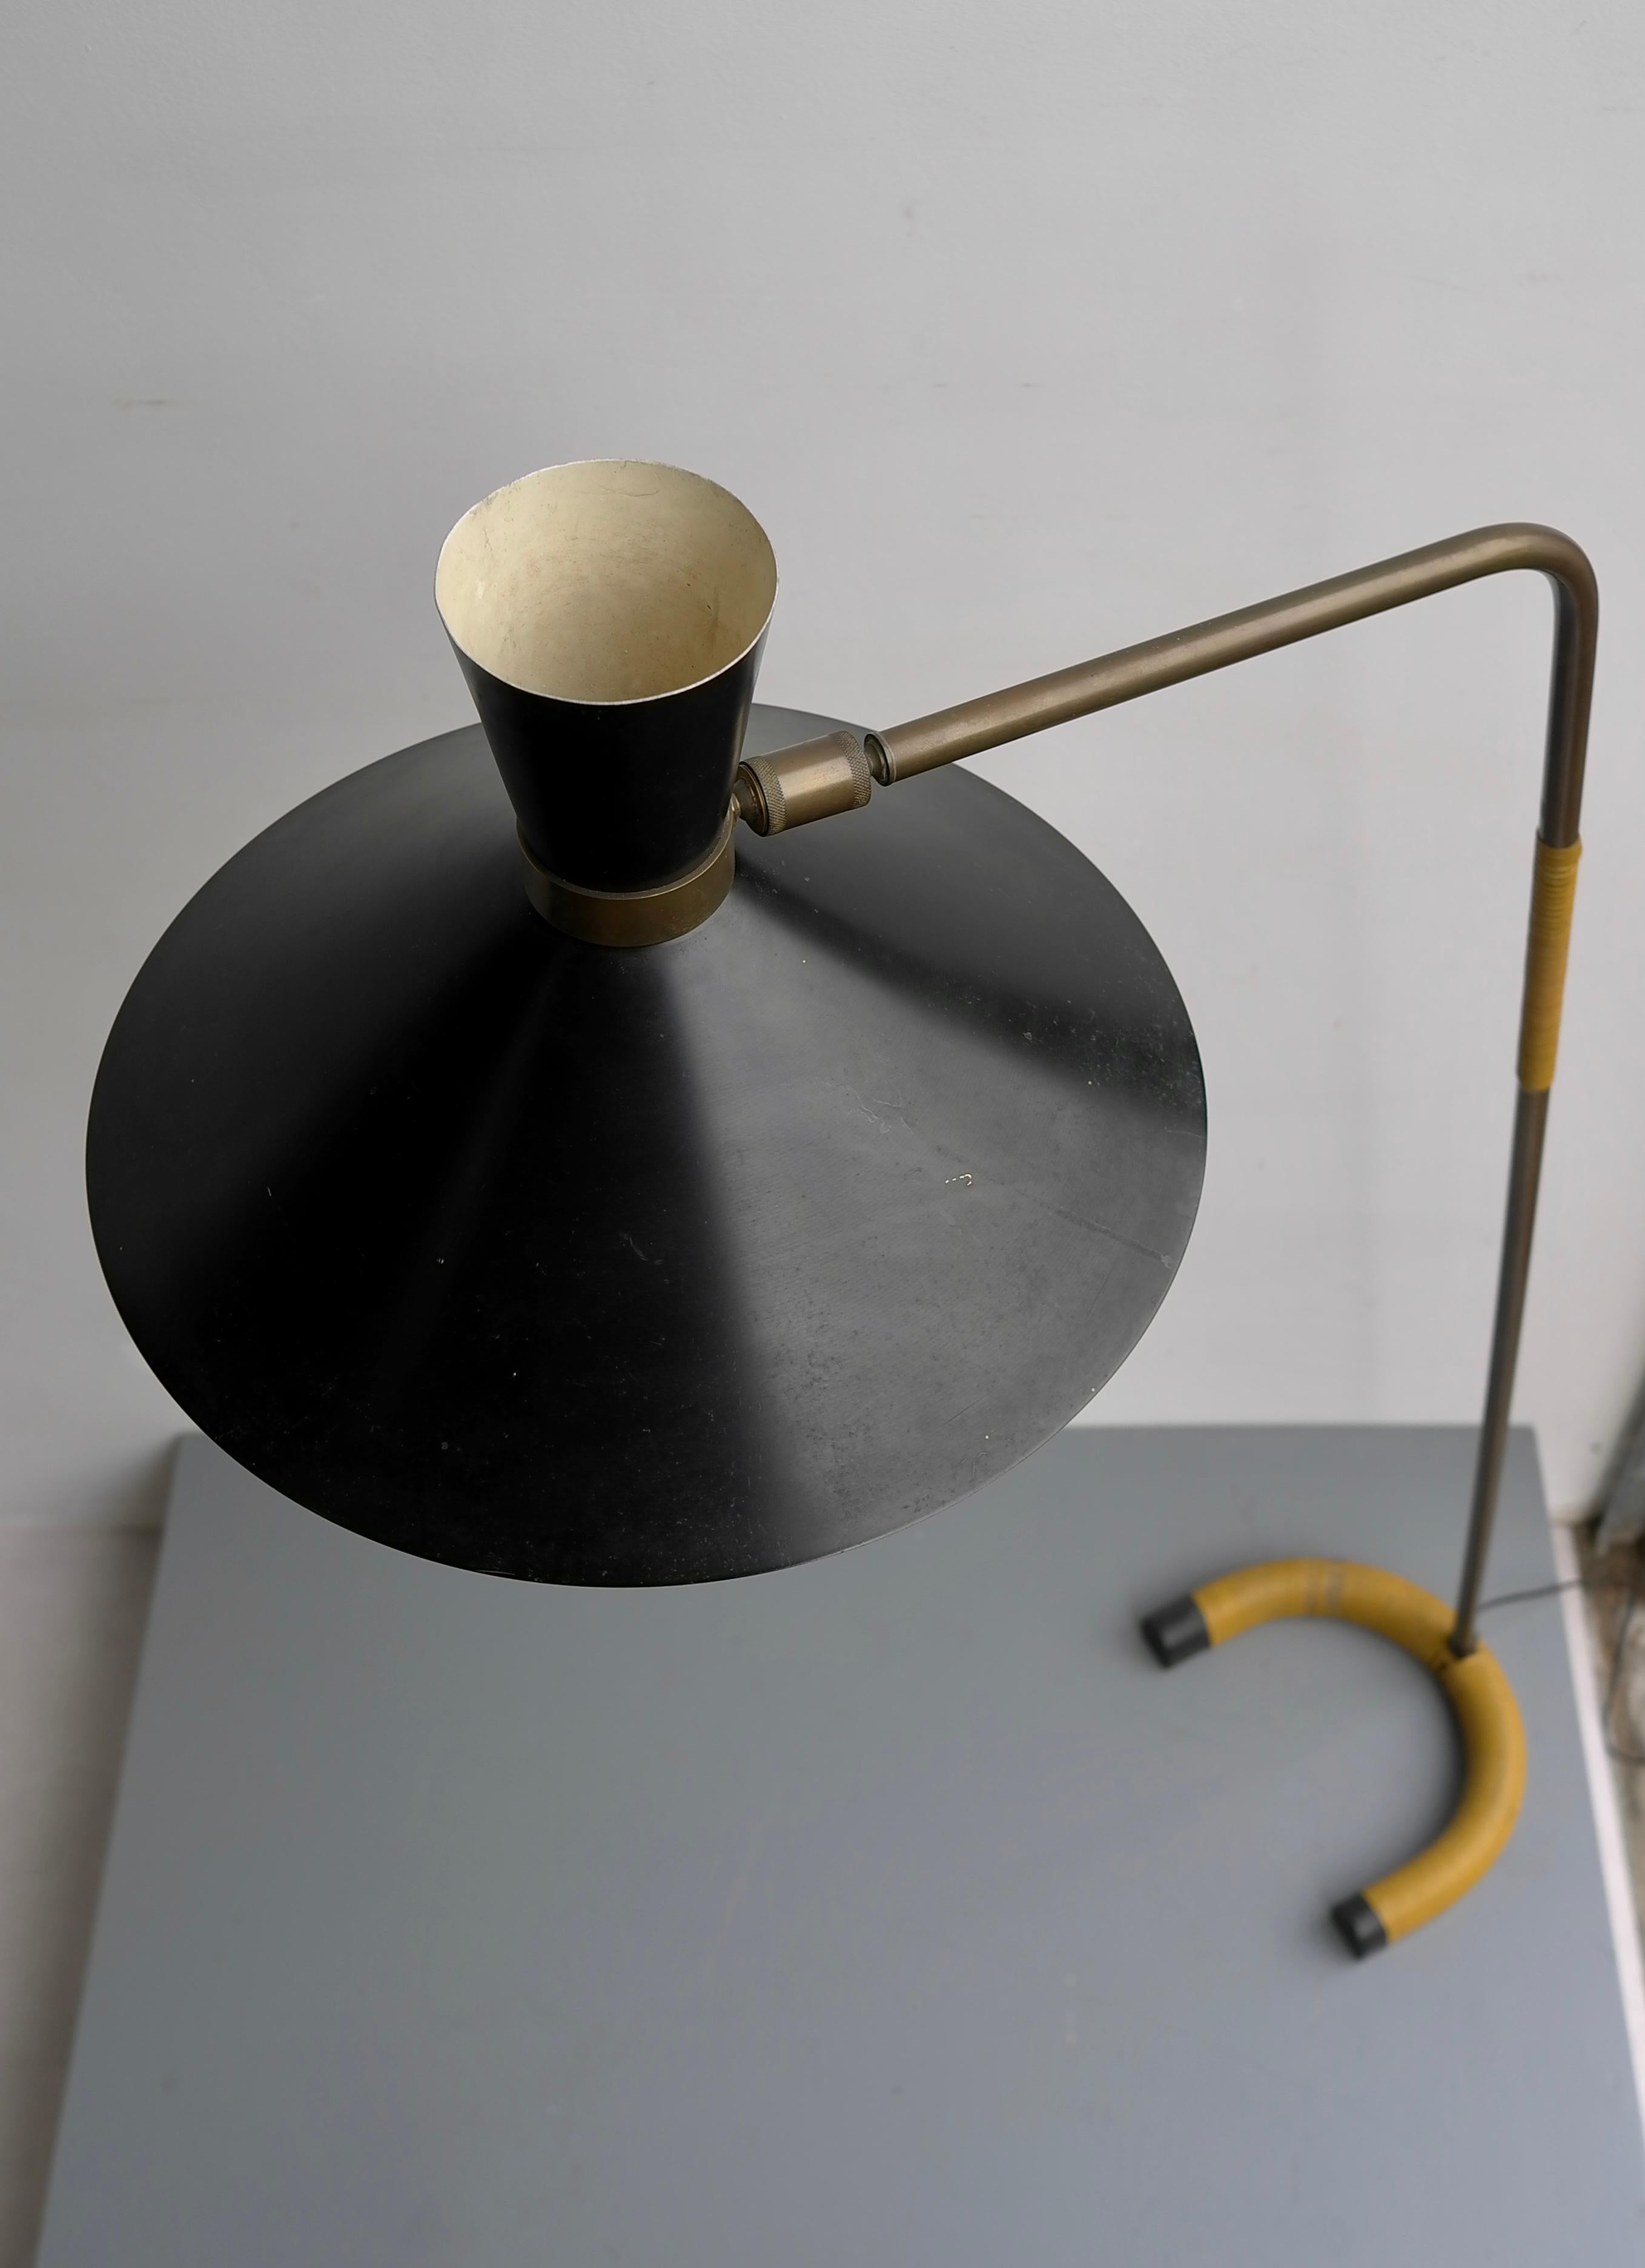 Metal Rare Floor Lamp by Jacques Biny in Brass and Black Hood Edition Luminalite, 1953 For Sale